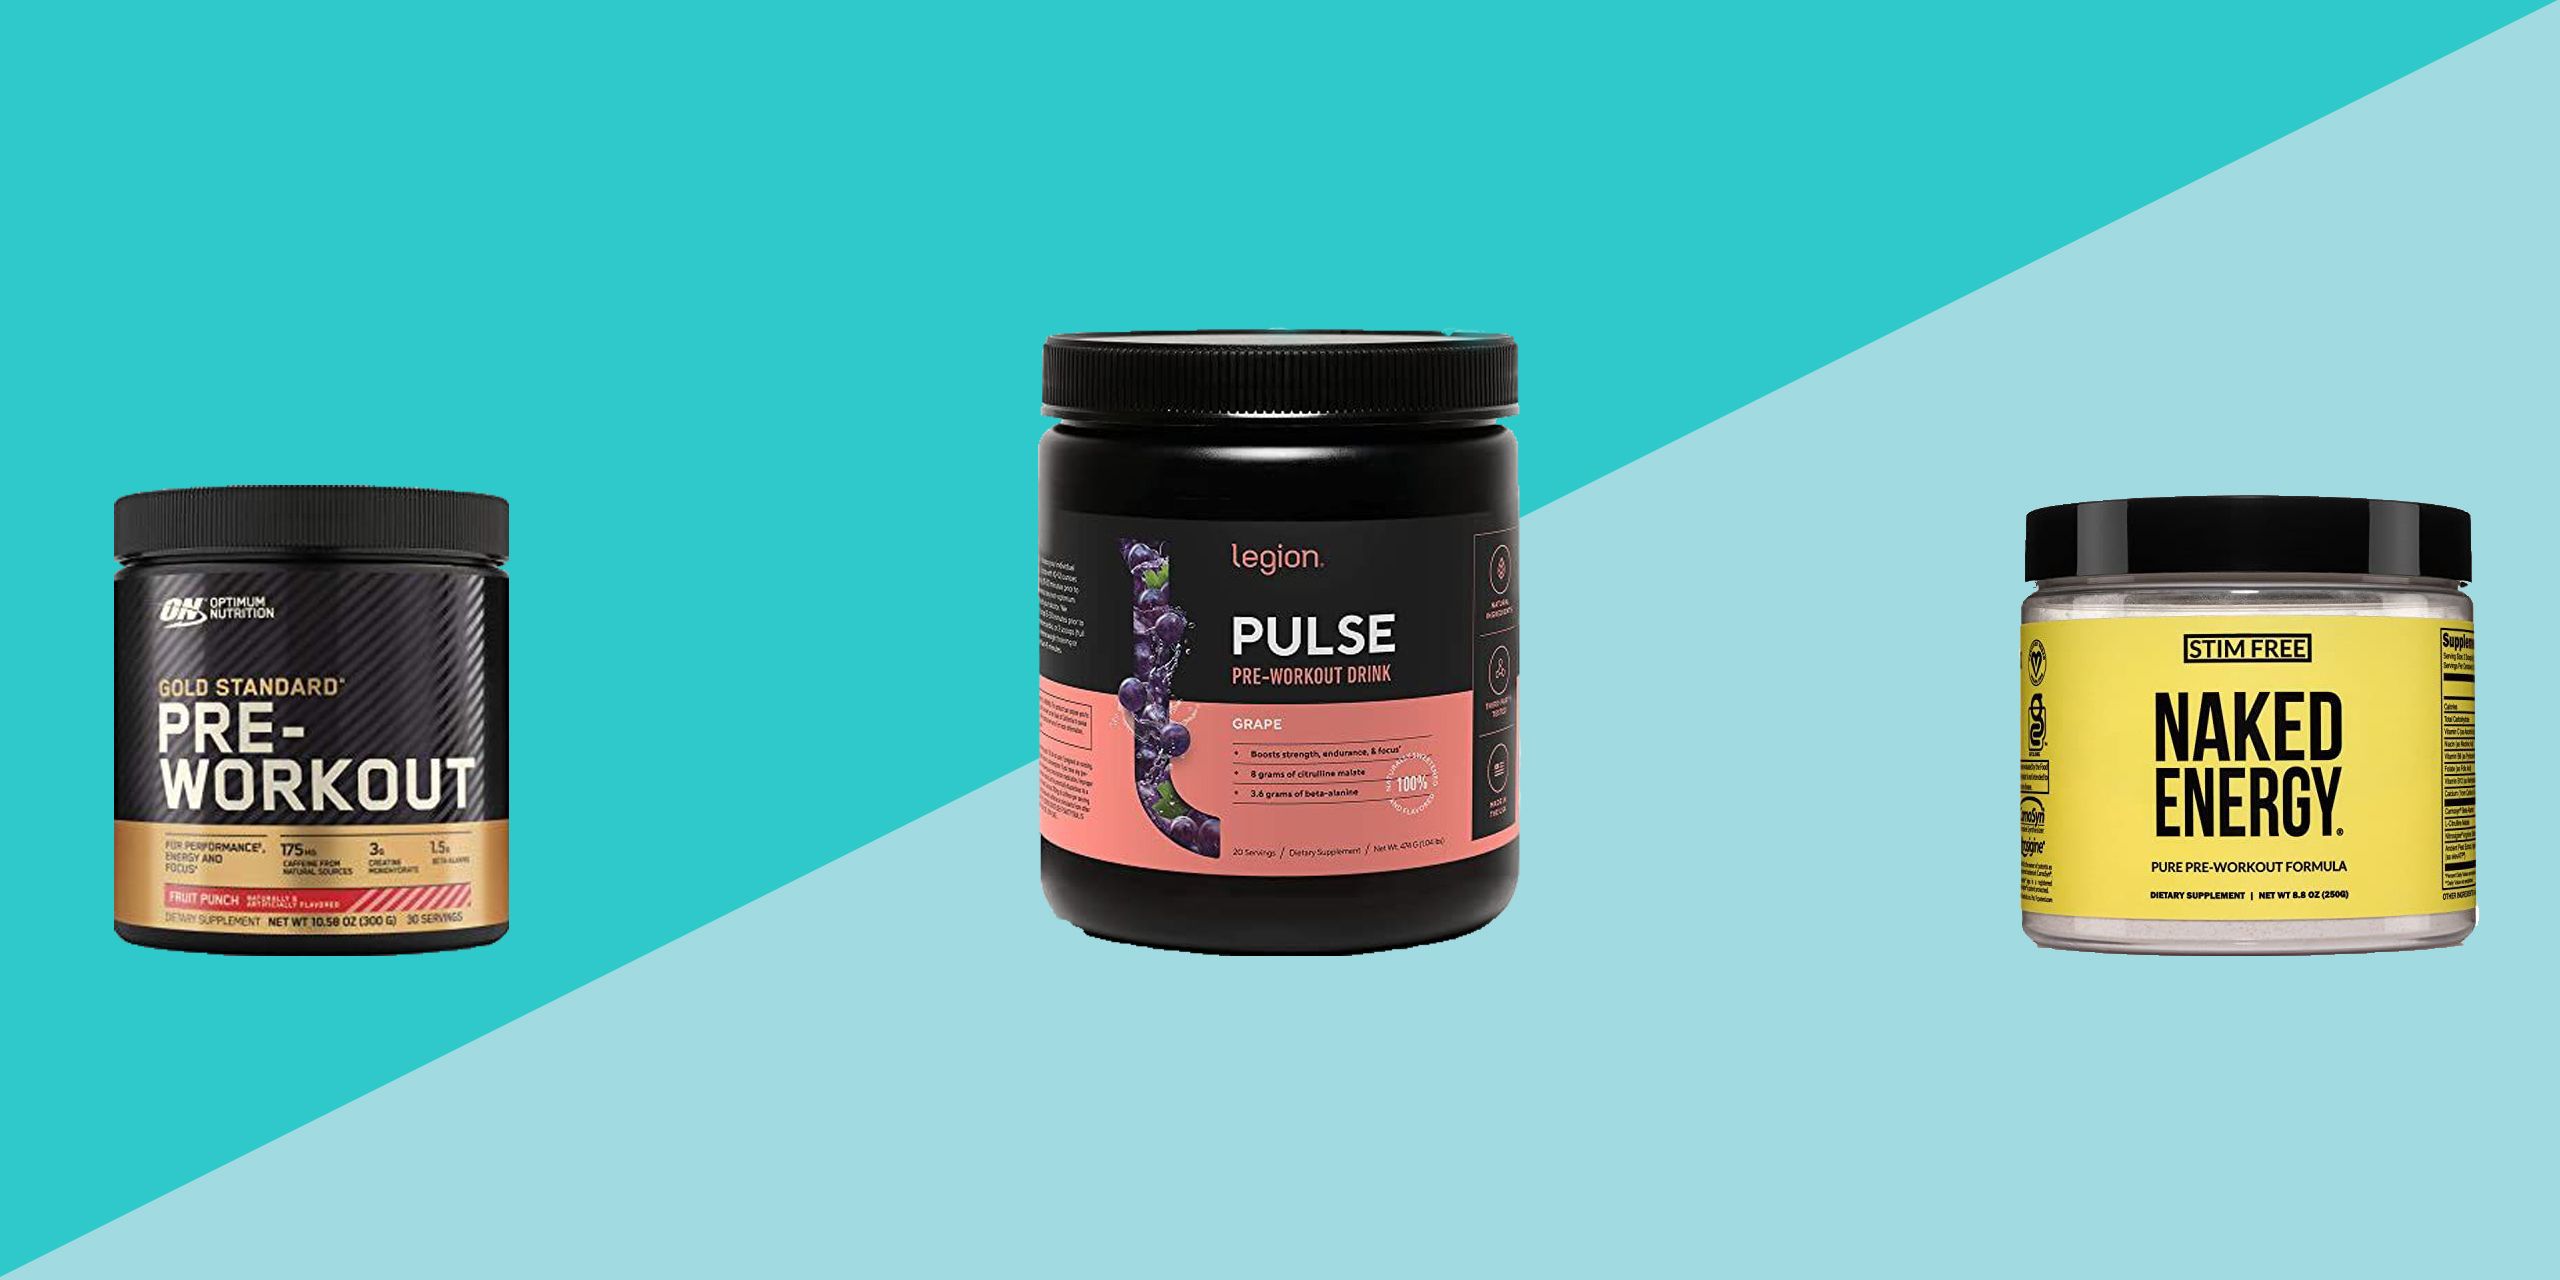 What To Know About Pre-Workout Supplements